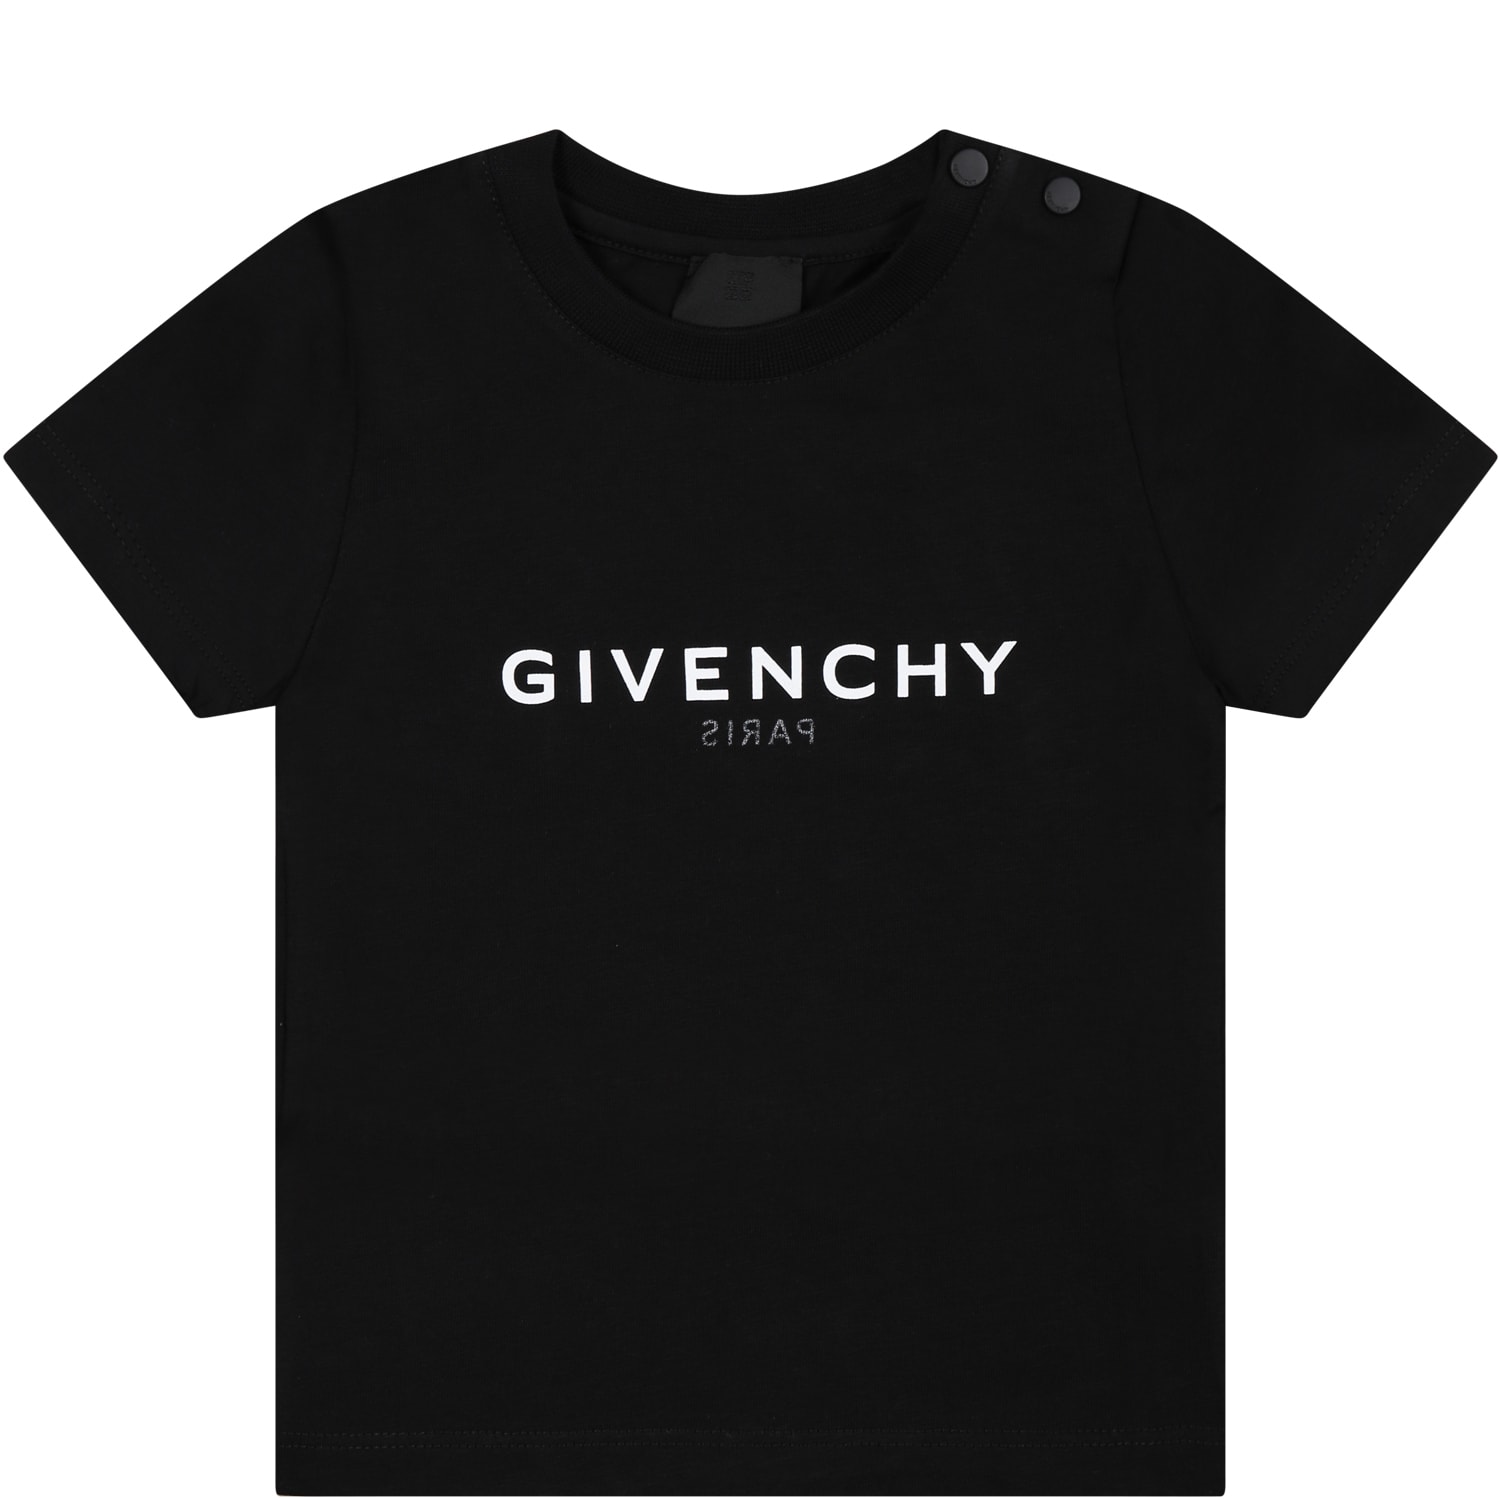 GIVENCHY BLACK T-SHIRT FOR BABIES WITH ICONIC LOGO